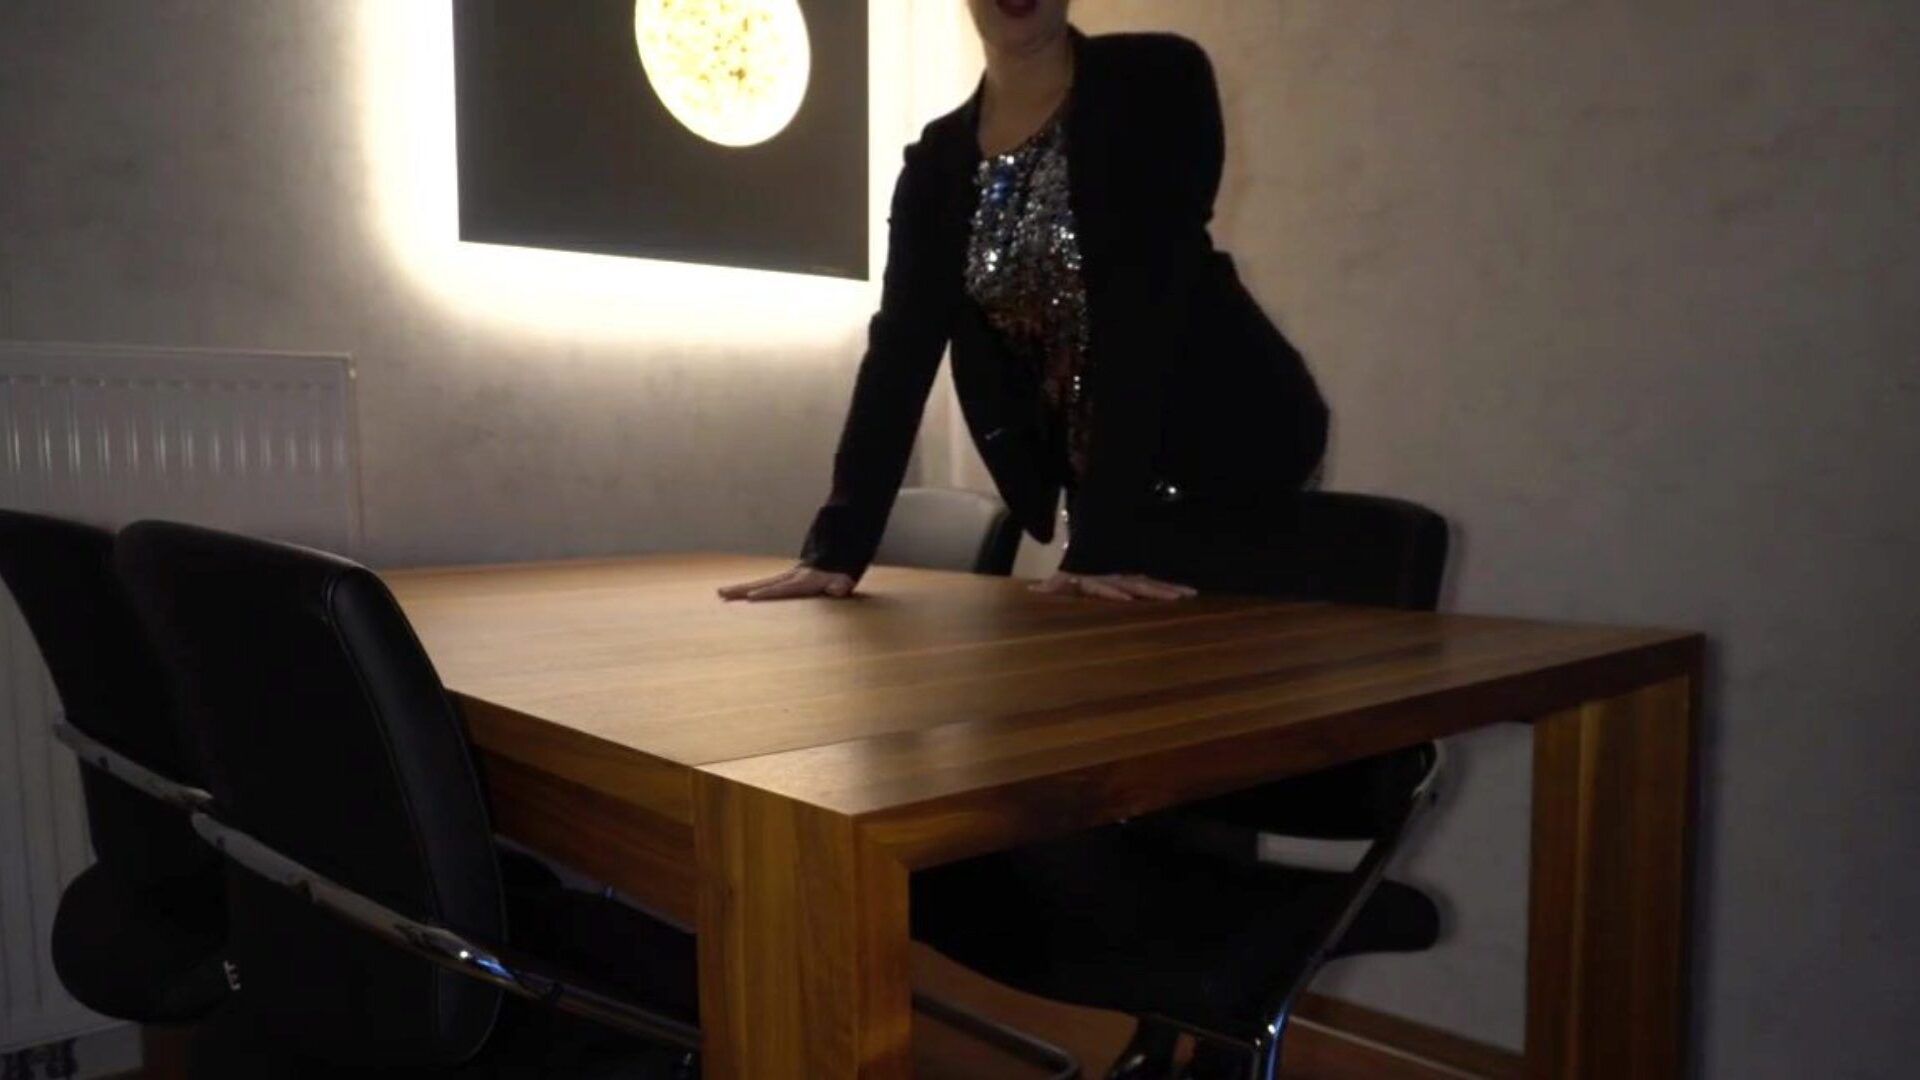 boss fucks secretary anally on the table ... watch boss fucks secretary anally on the table - business-bitch episode on xhamster - the ultimate collection of free Danish Milf hd pornography tube vids